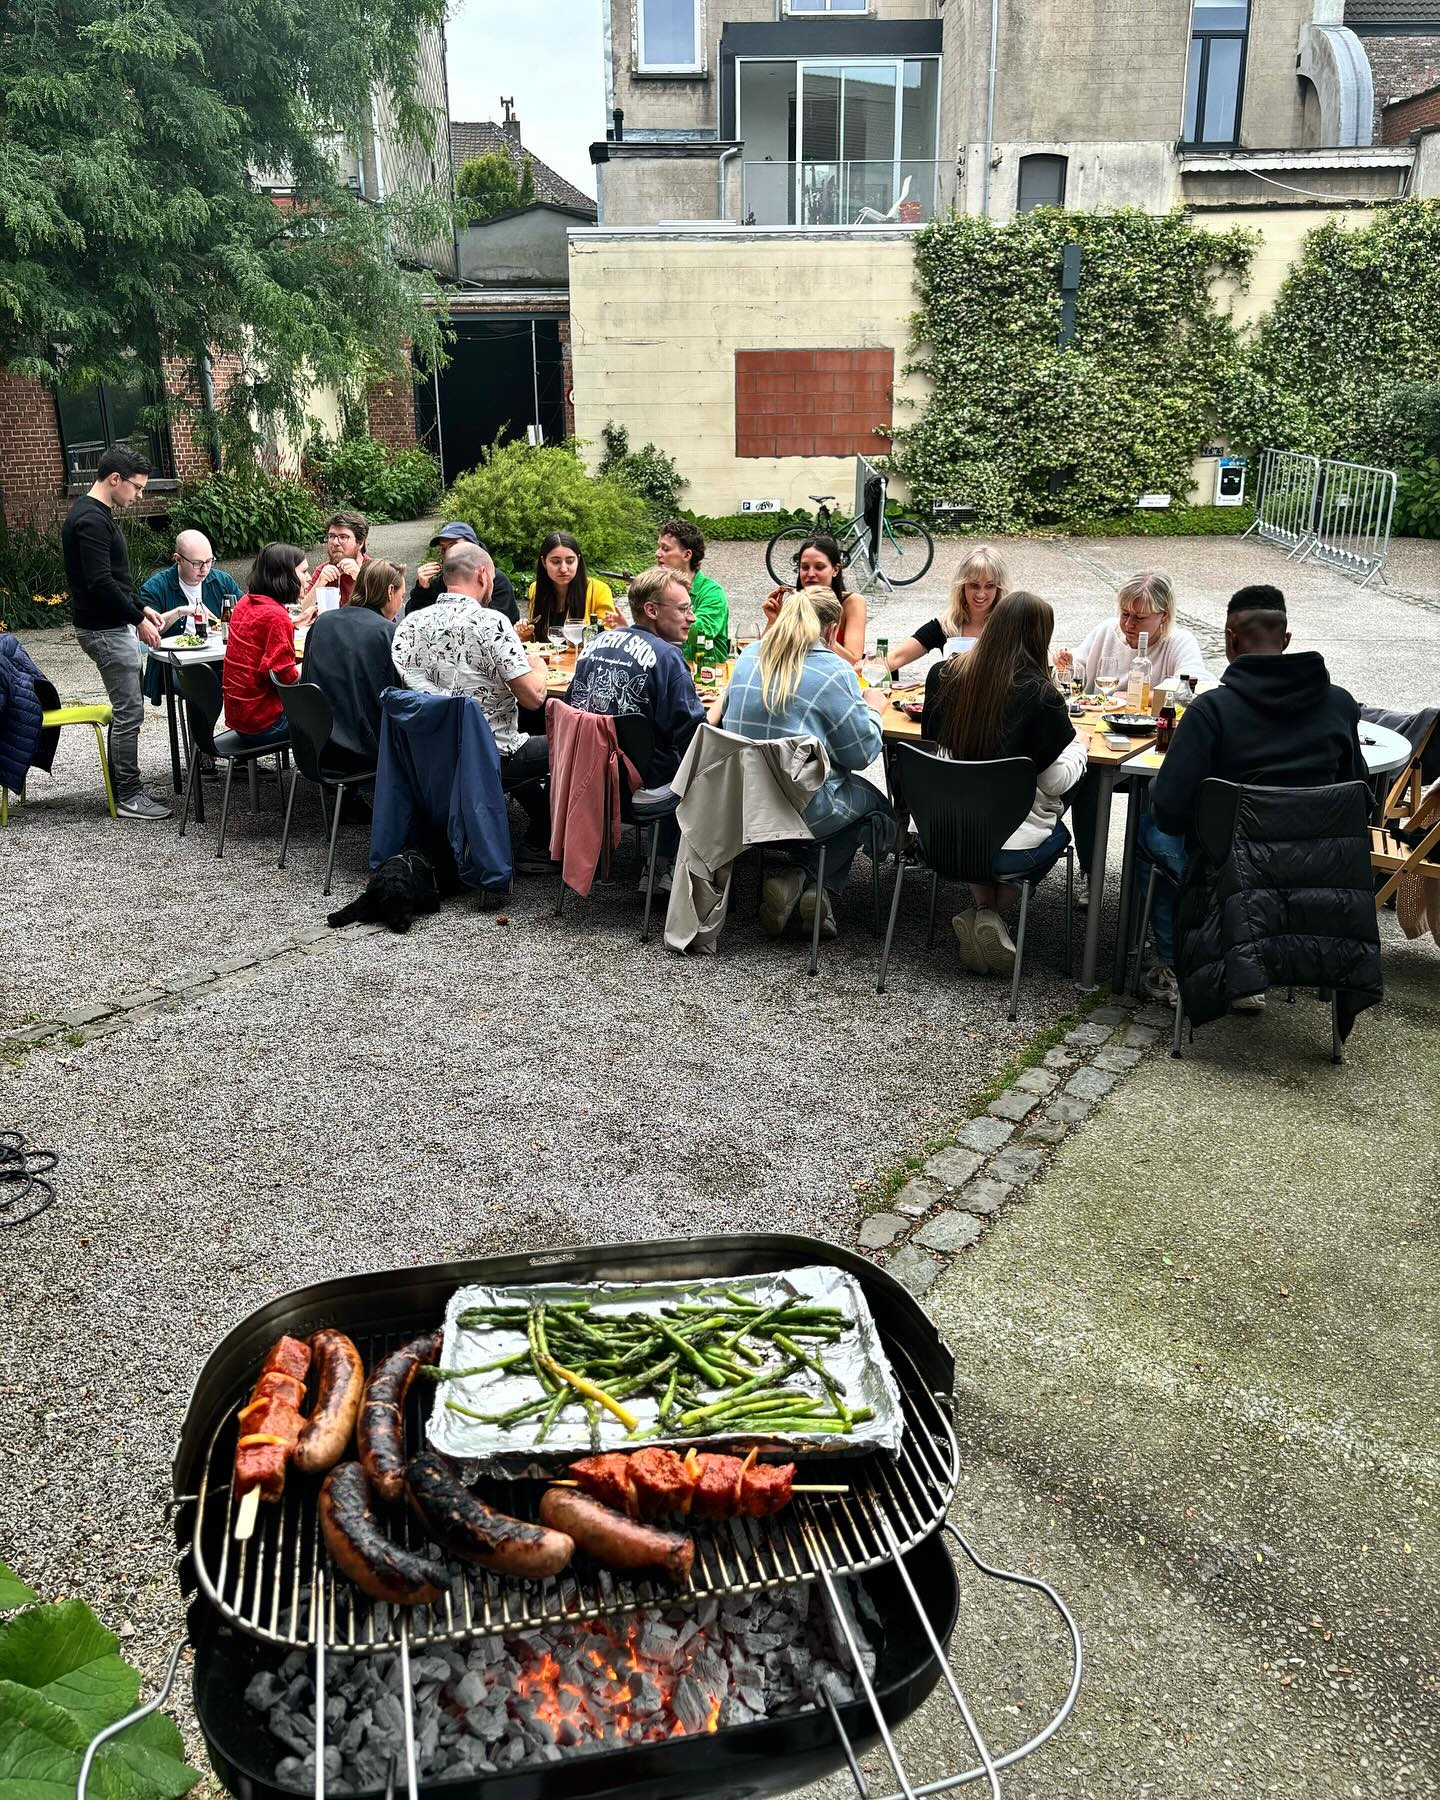 There’s nothing like firing up the grill and sharing delicious flavors with the team. 
#GrillandChill #LifeAtBaldwin